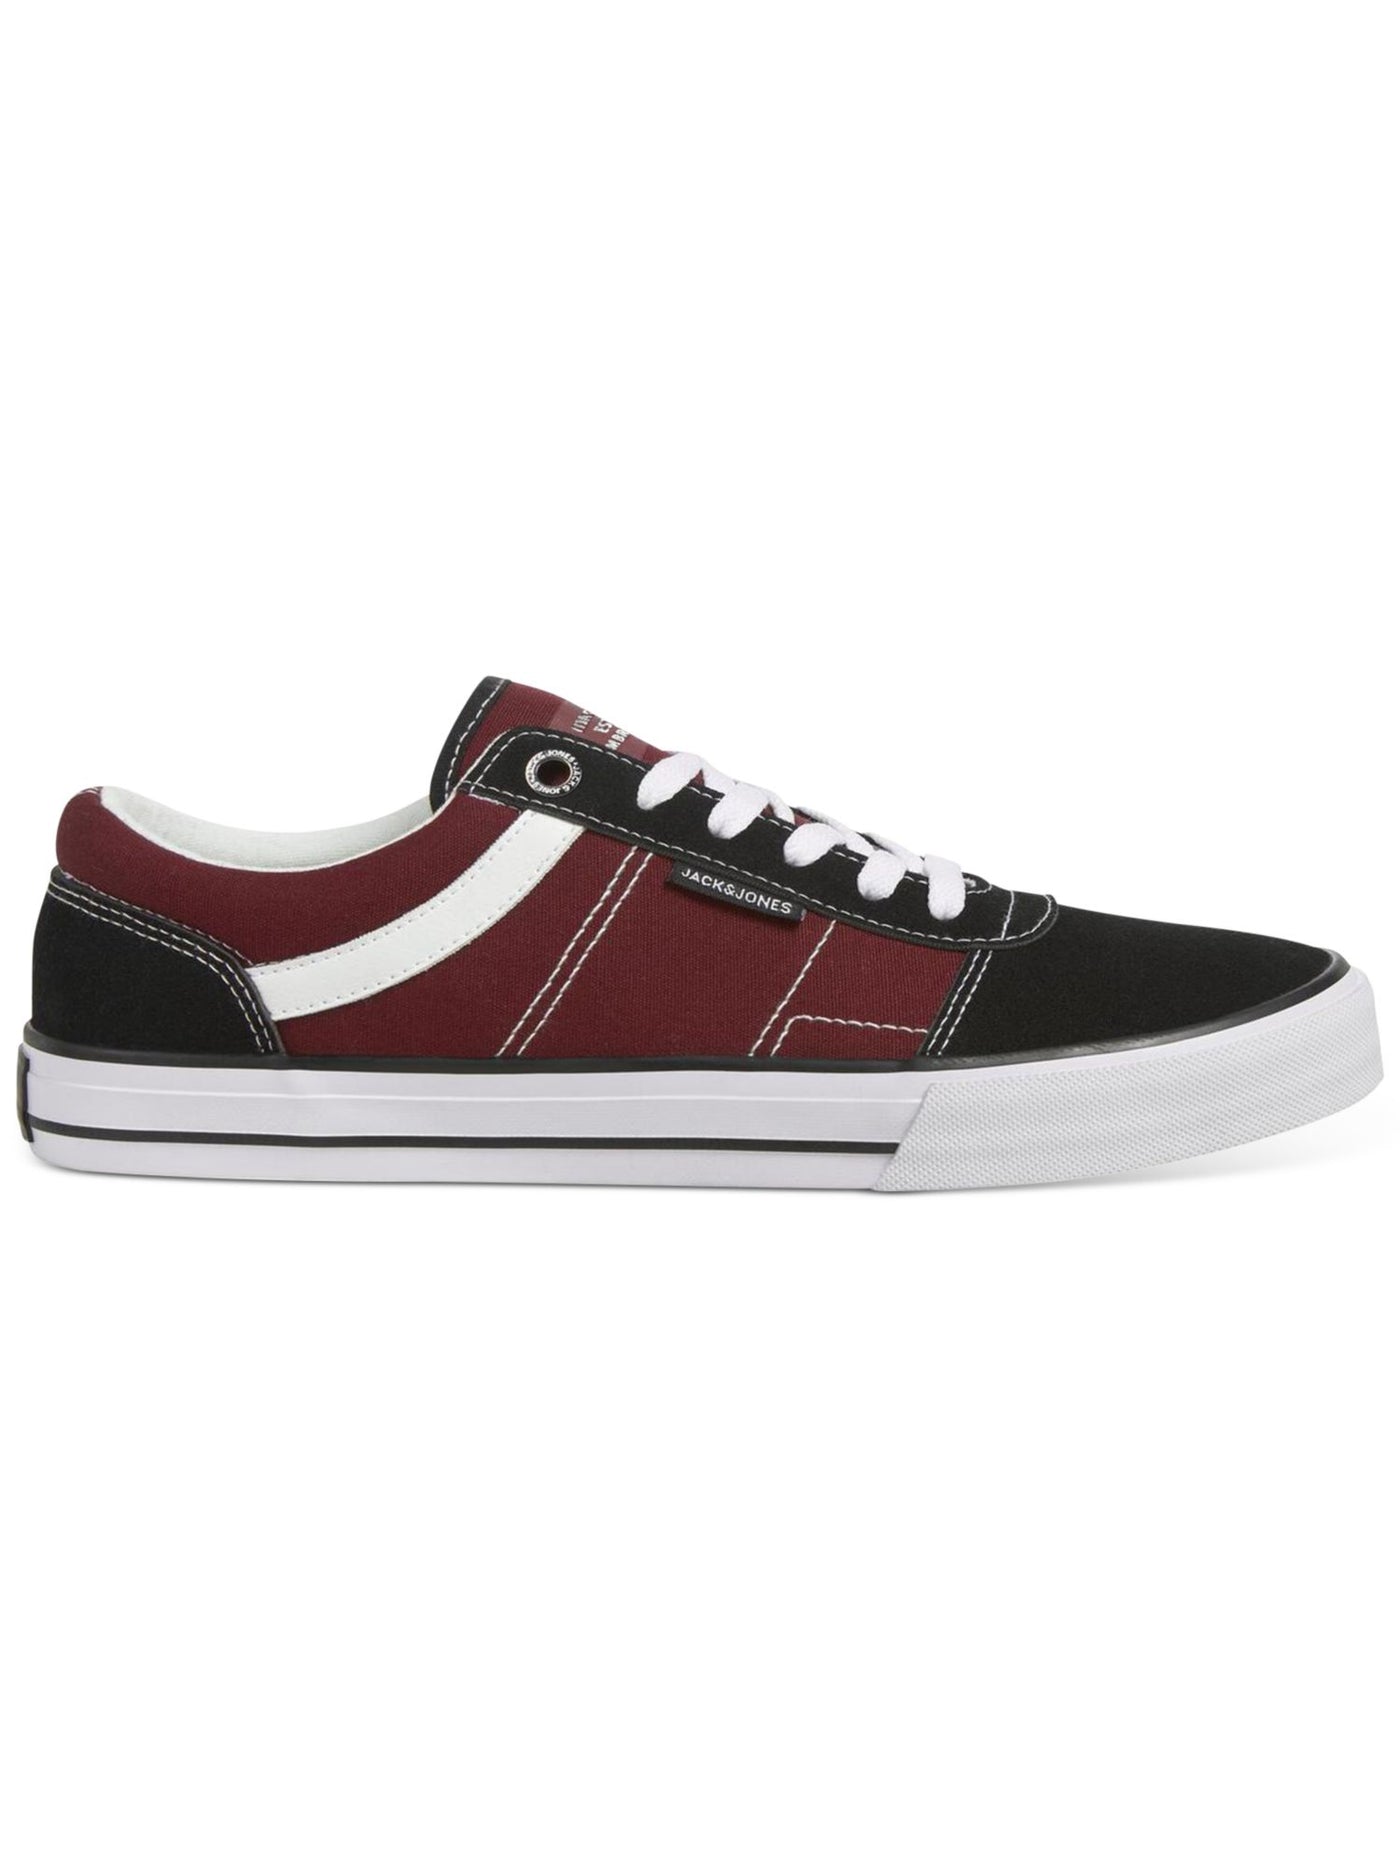 JACK & JONES Mens Burgundy Mixed Media Logo On Tongue Padded Dante Round Toe Lace-Up Sneakers Shoes 12